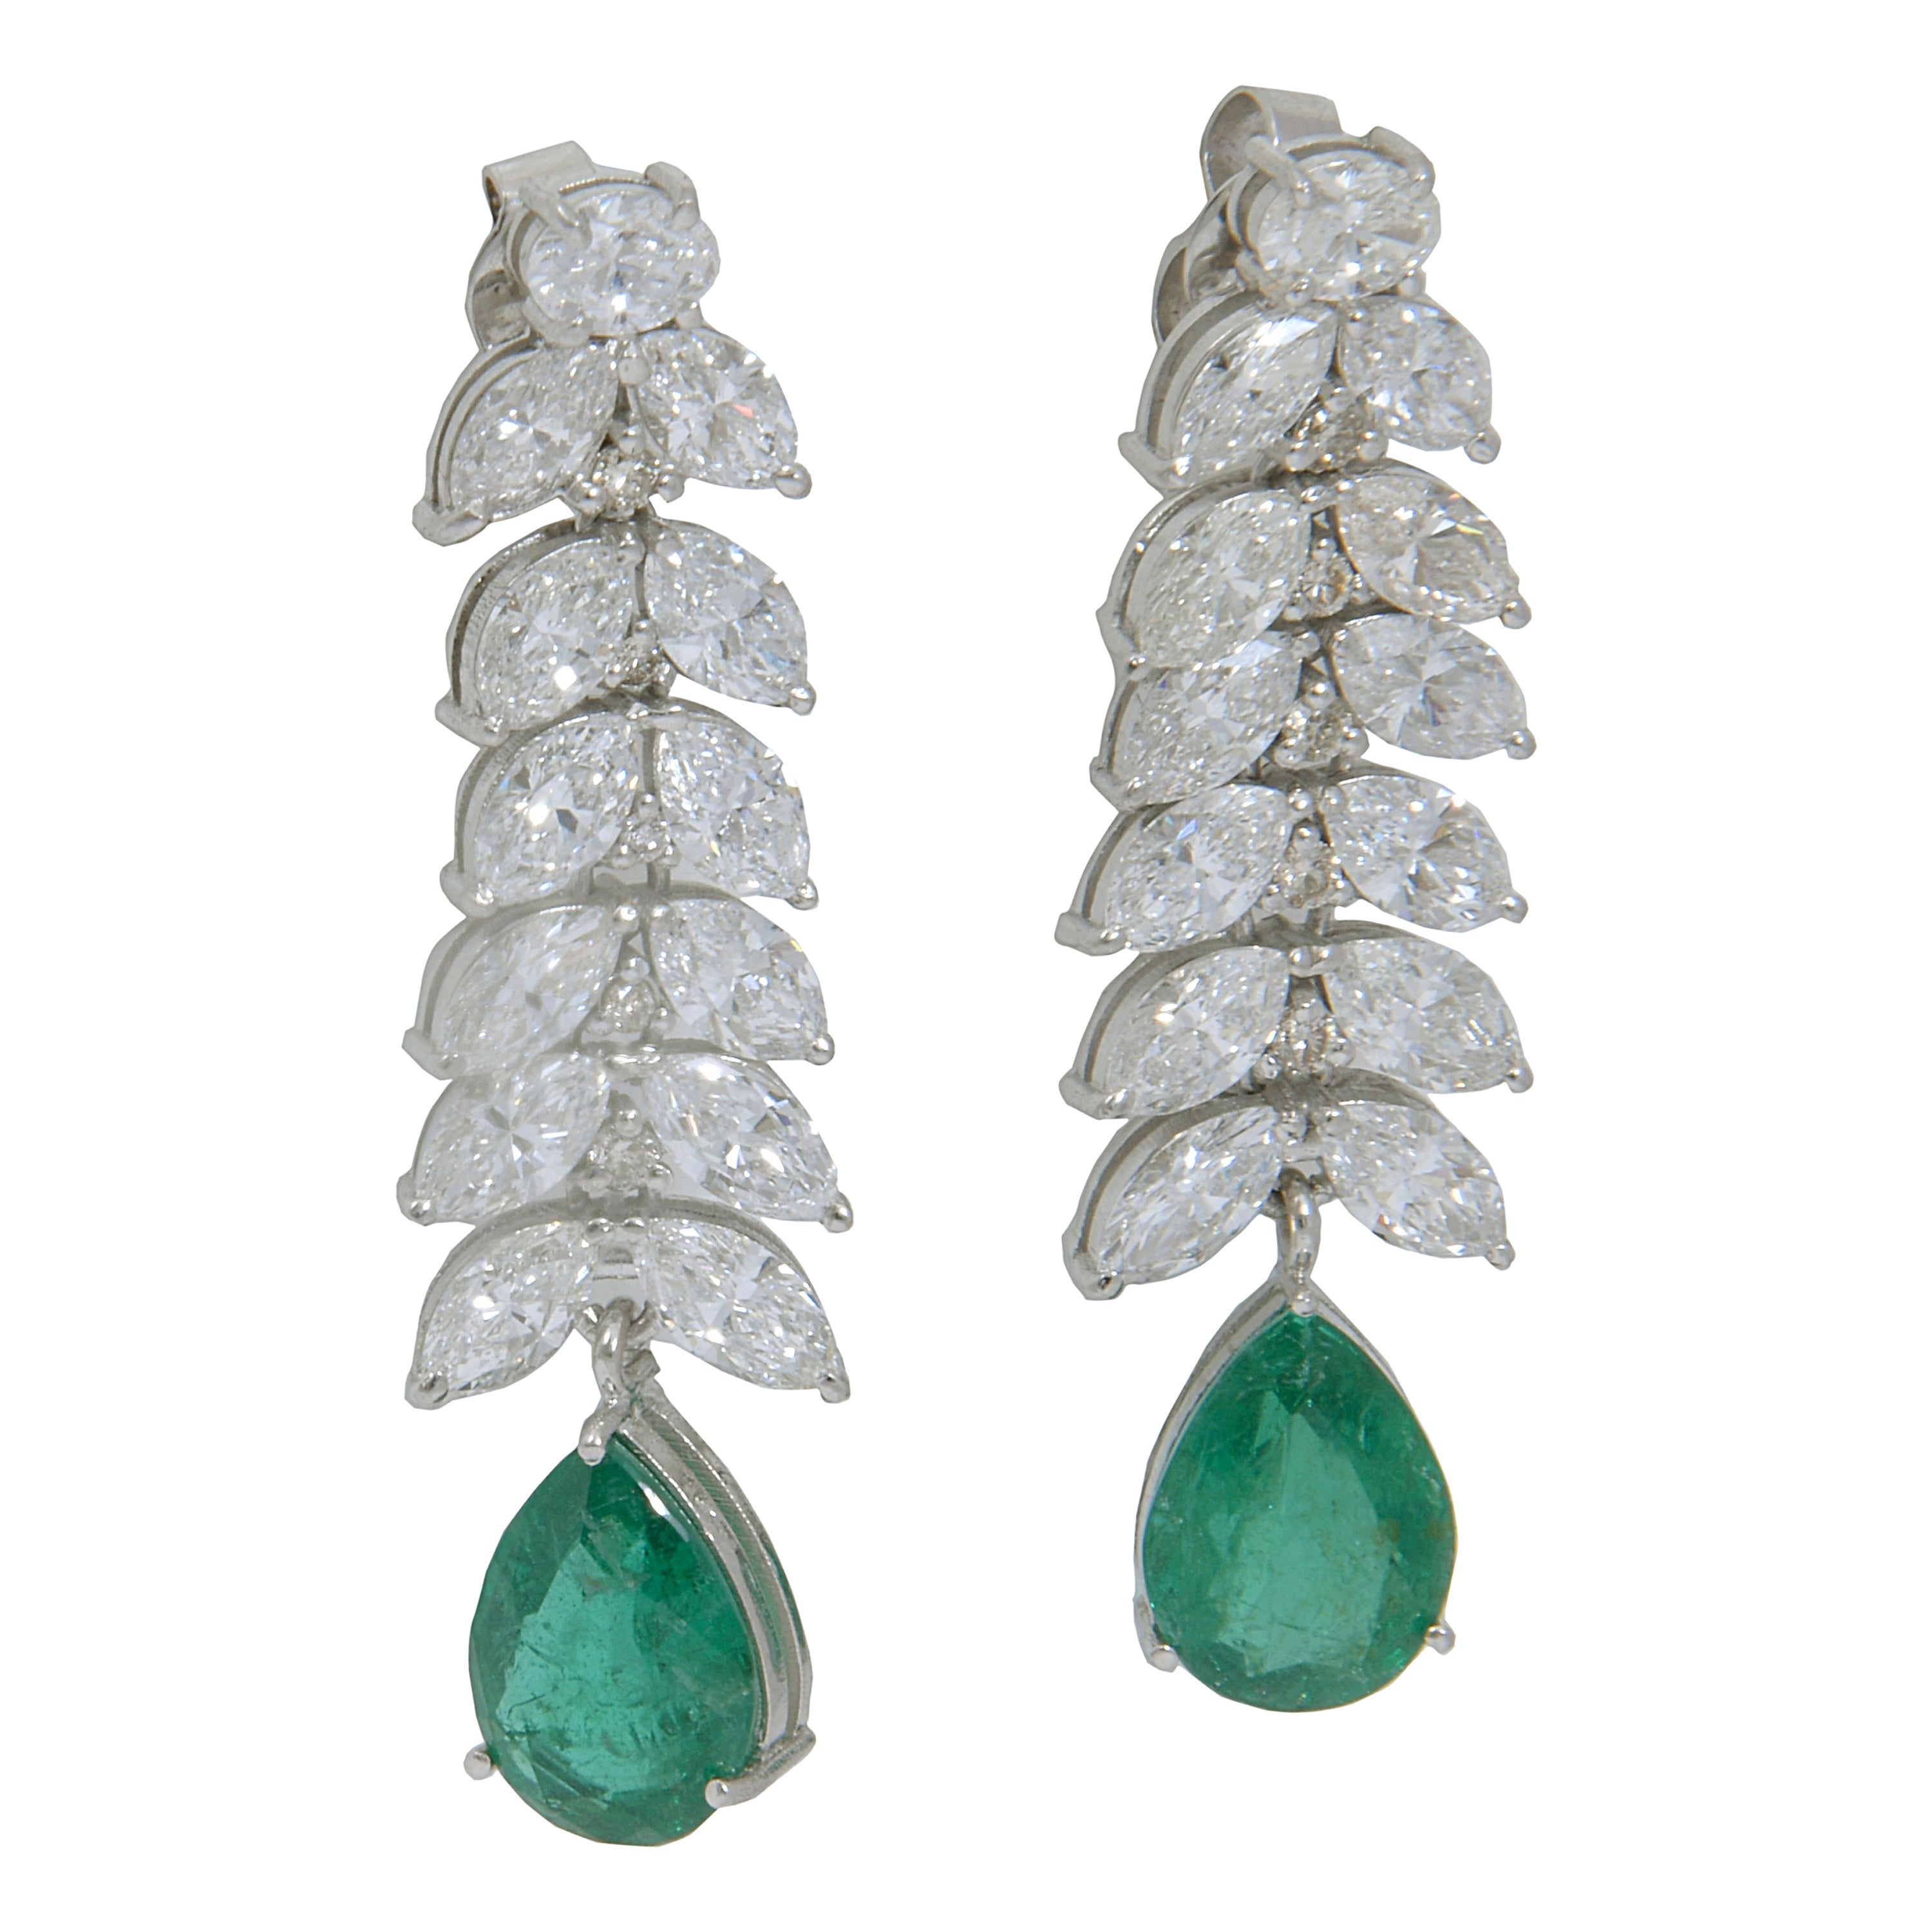 Natural Diamond Earring with 9.28cts Diamond & 5.87cts Emerald in 14k Gold